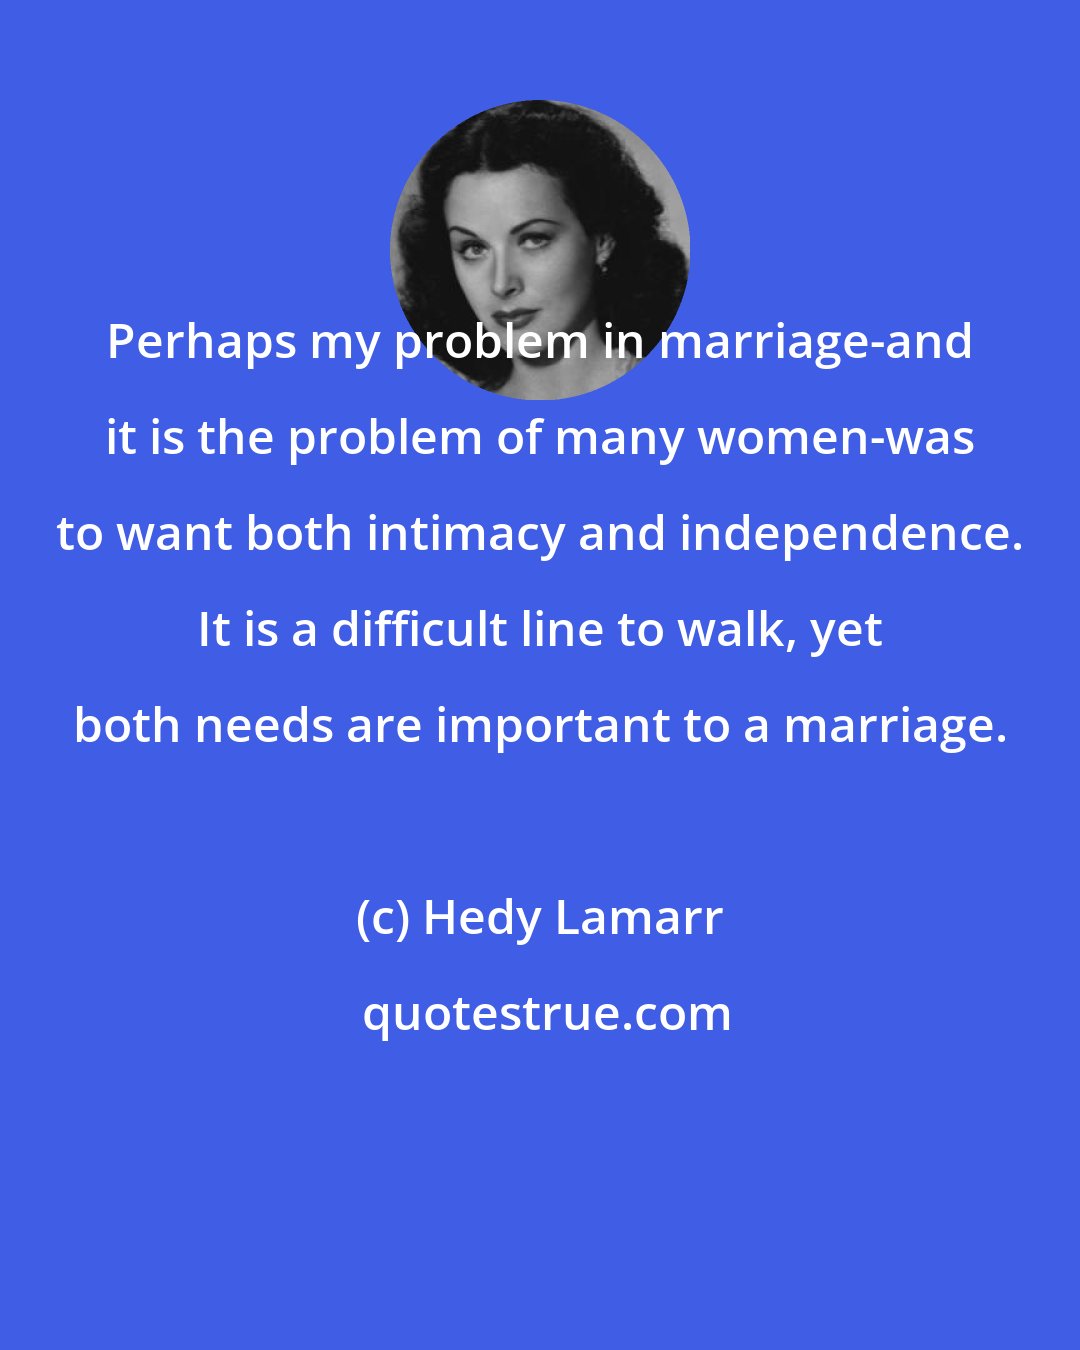 Hedy Lamarr: Perhaps my problem in marriage-and it is the problem of many women-was to want both intimacy and independence. It is a difficult line to walk, yet both needs are important to a marriage.